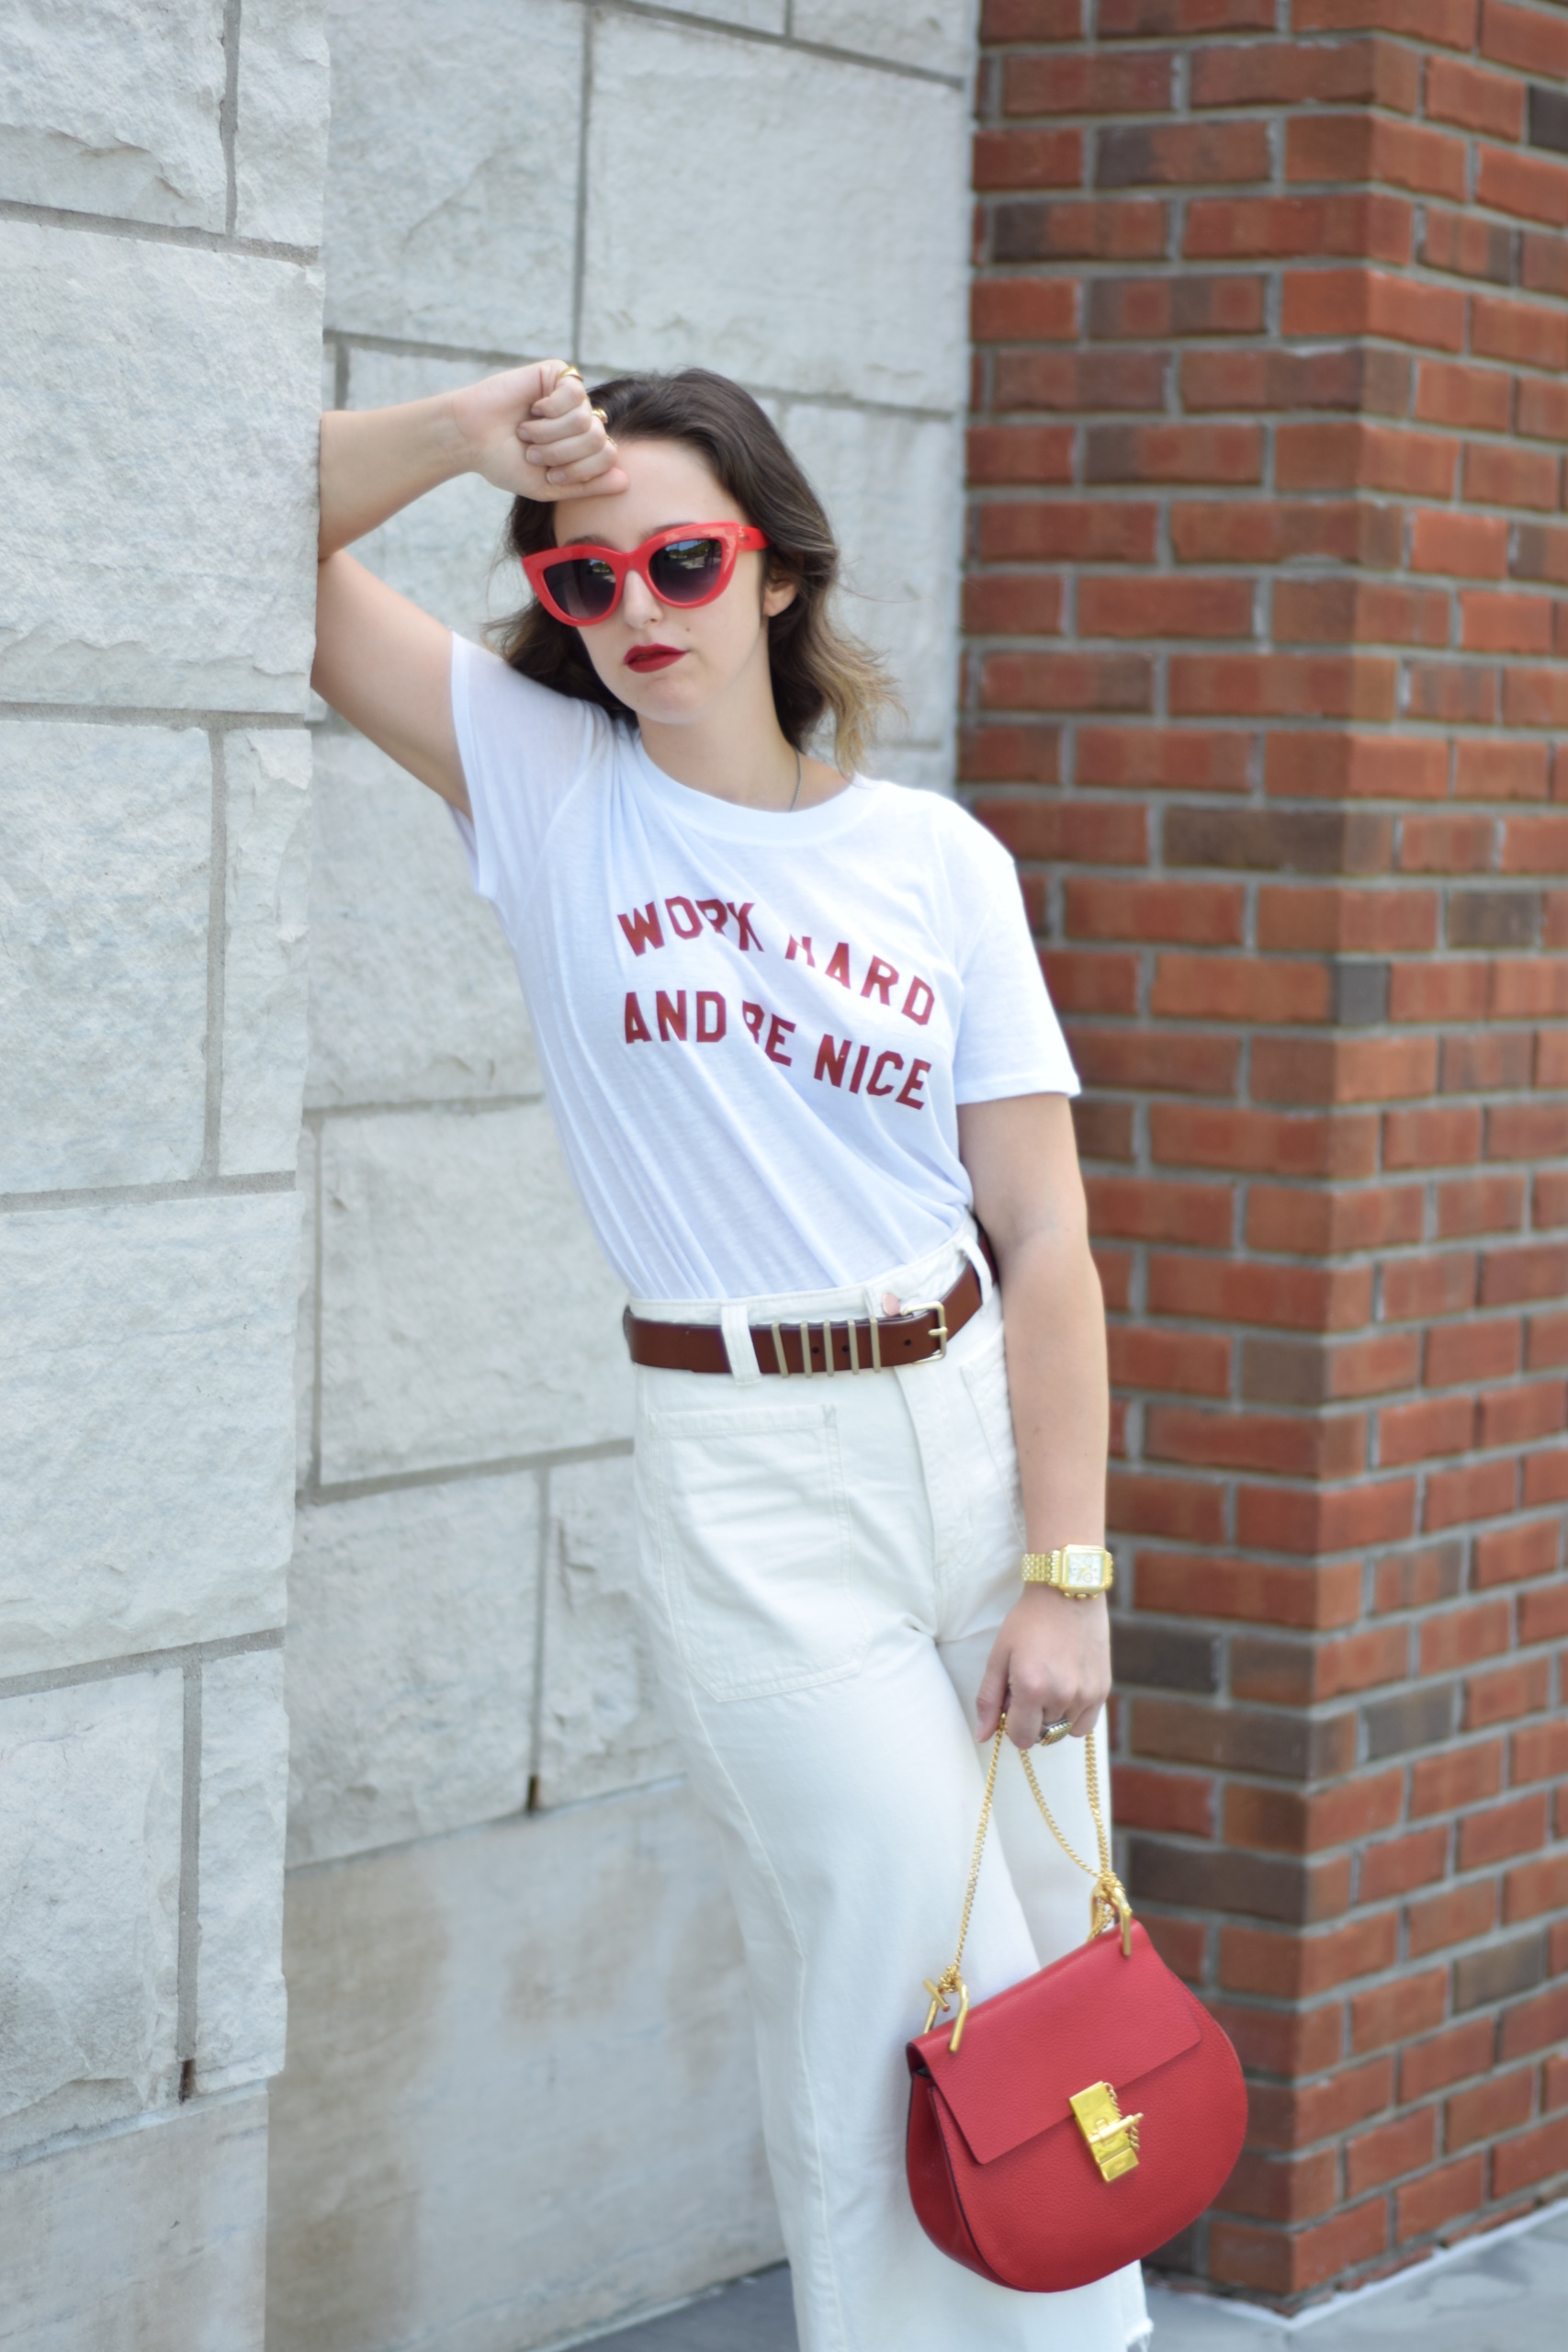 Street Style Spotting: The Chloé 'Drew' Bag - The Front Row View